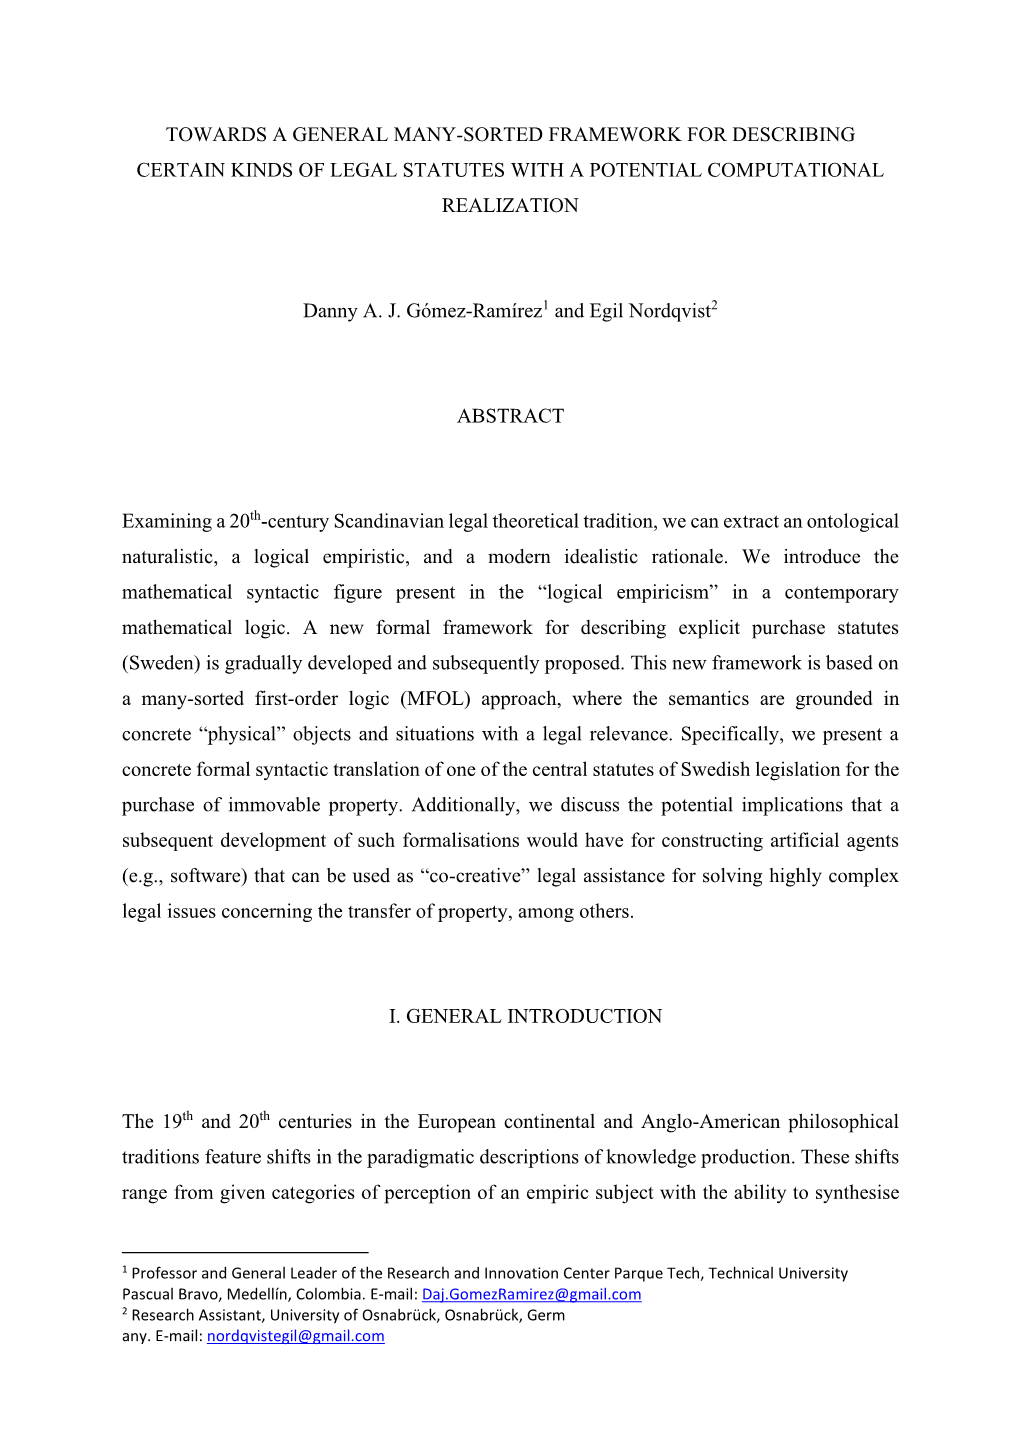 Towards a General Many-Sorted Framework for Describing Certain Kinds of Legal Statutes with a Potential Computational Realization